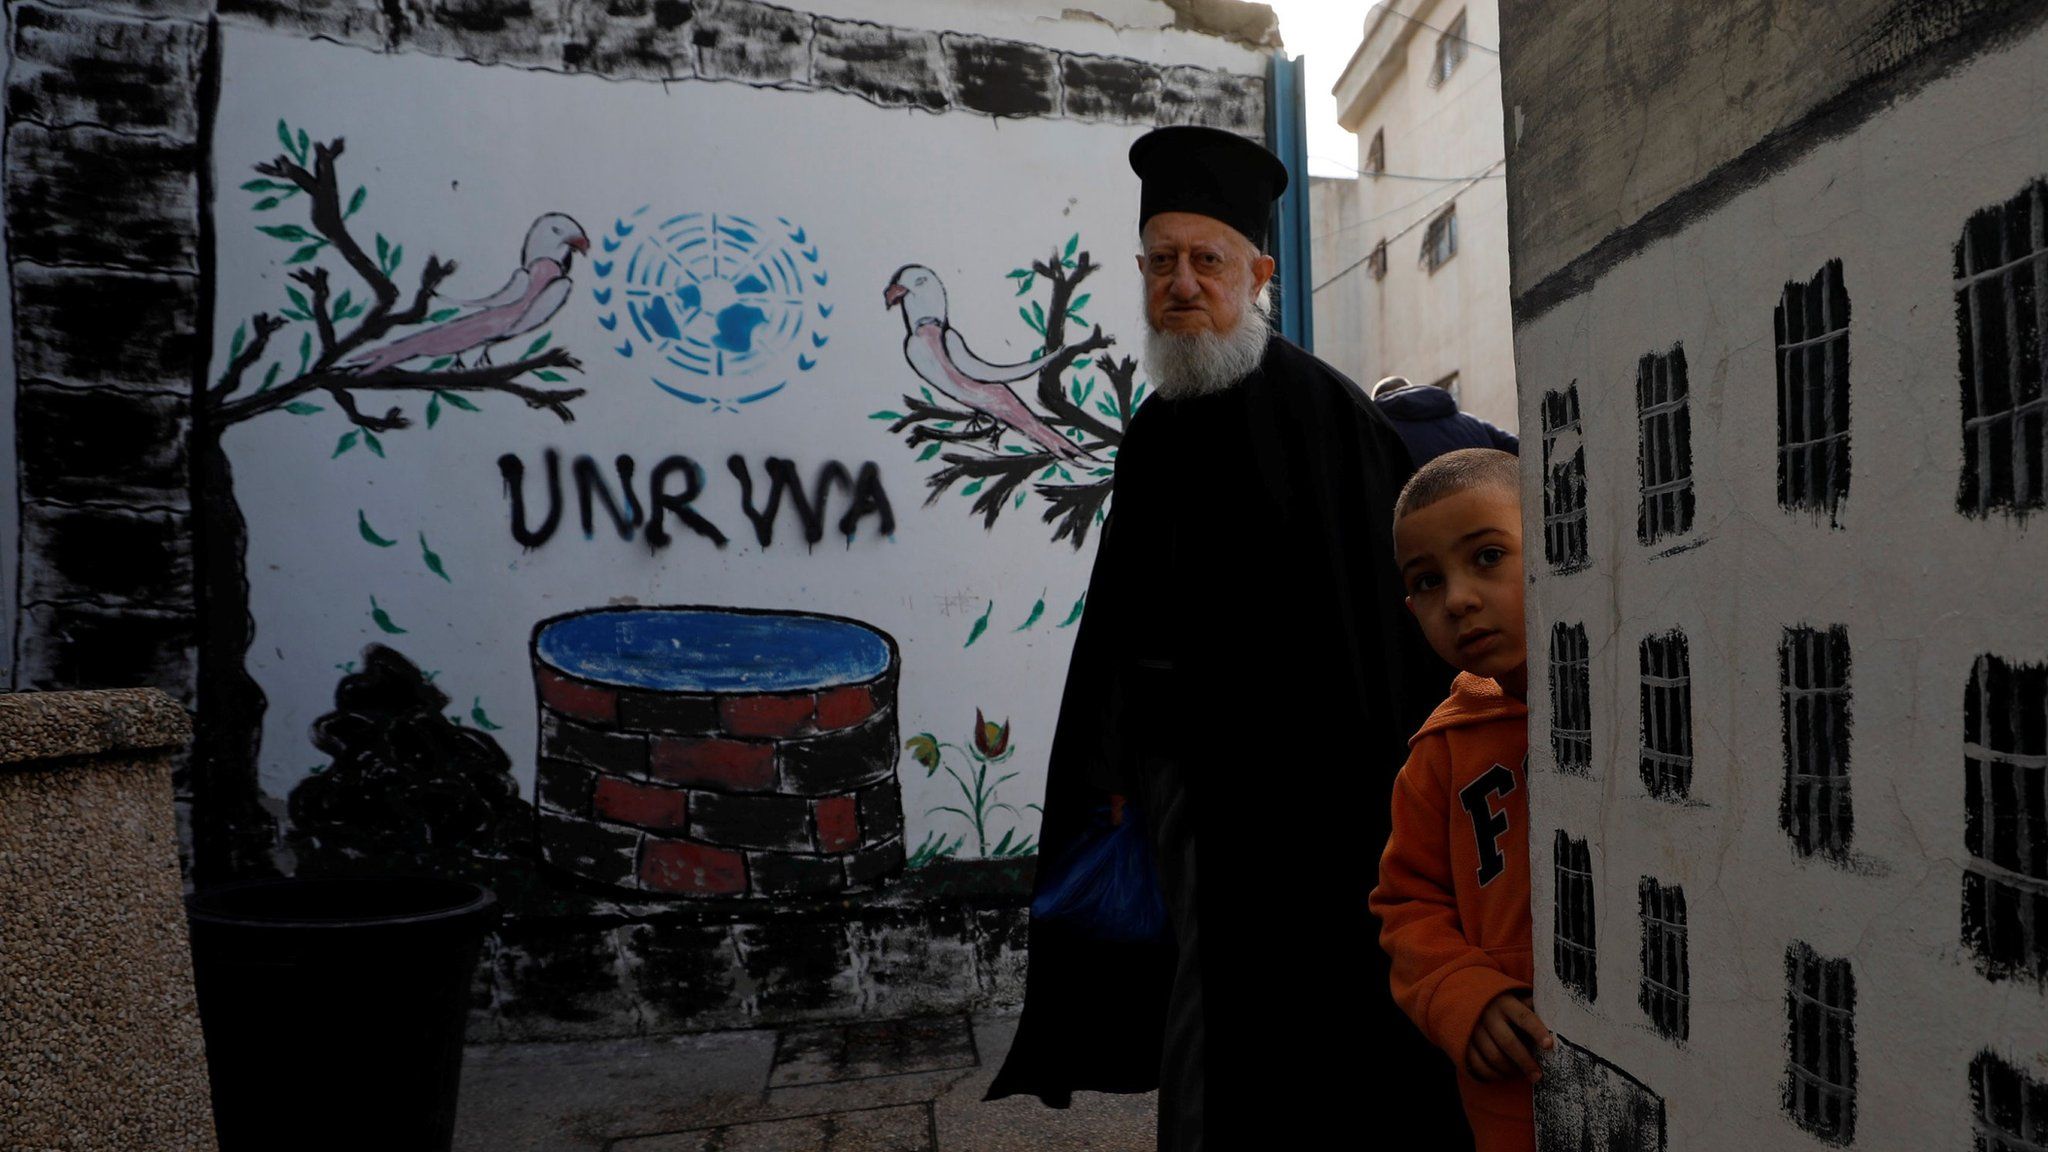 Palestinians stand near a mural showing the logo of United Nations Relief and Works Agency (Unrwa) in Jalazone refugee camp, near the West Bank city of Ramallah (3 January 2018)